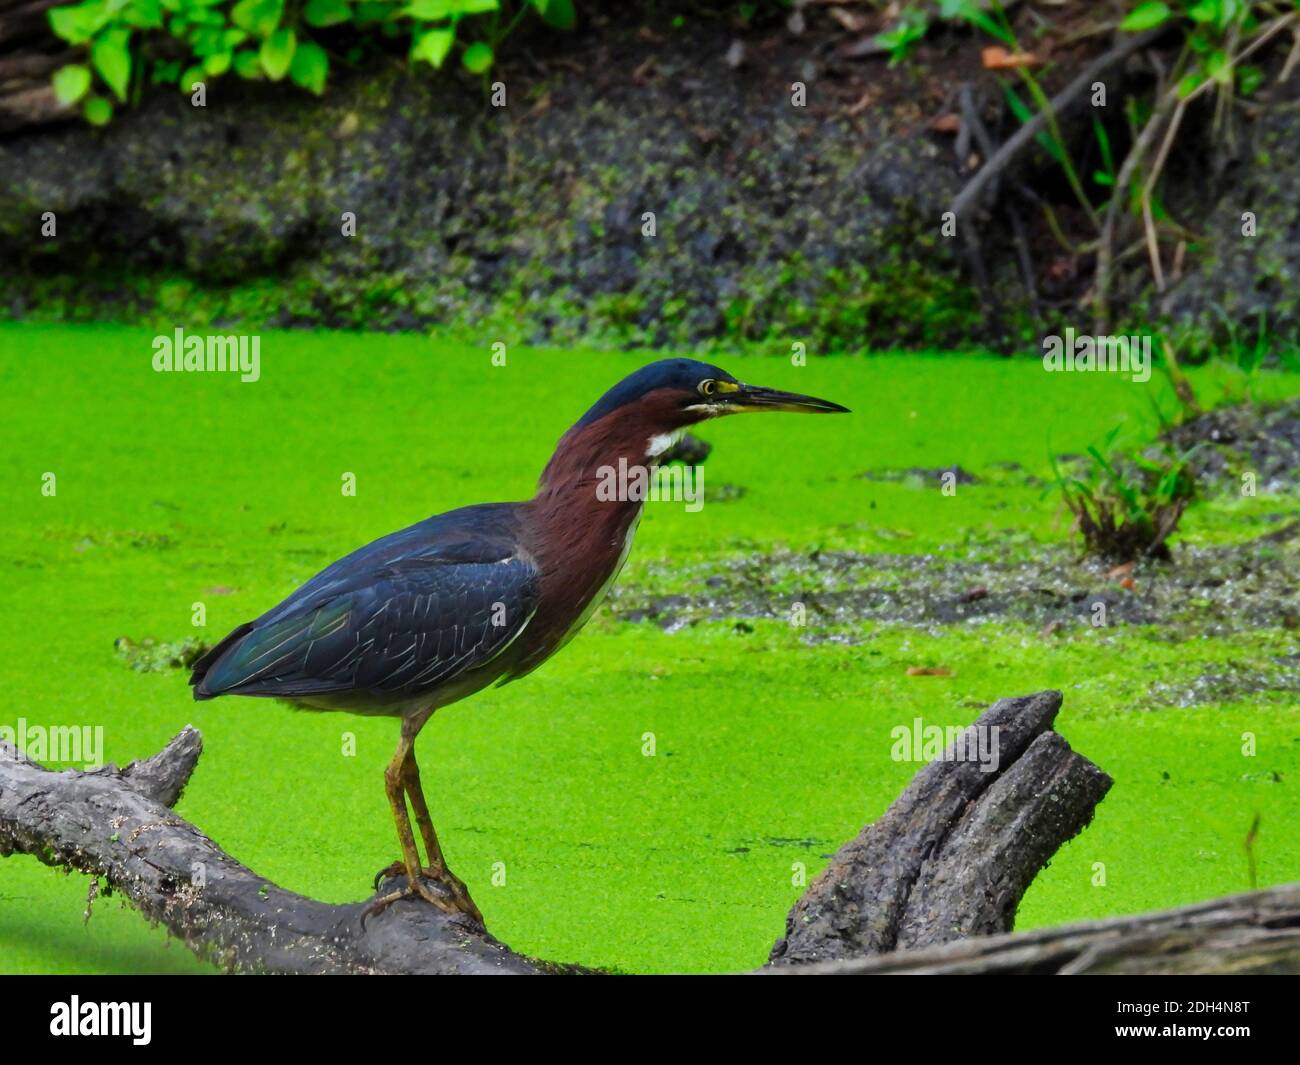 Heron on a tree branch: Green heron bird stands with neck out over a pond covered with a full, bright green duckweed bloom Stock Photo